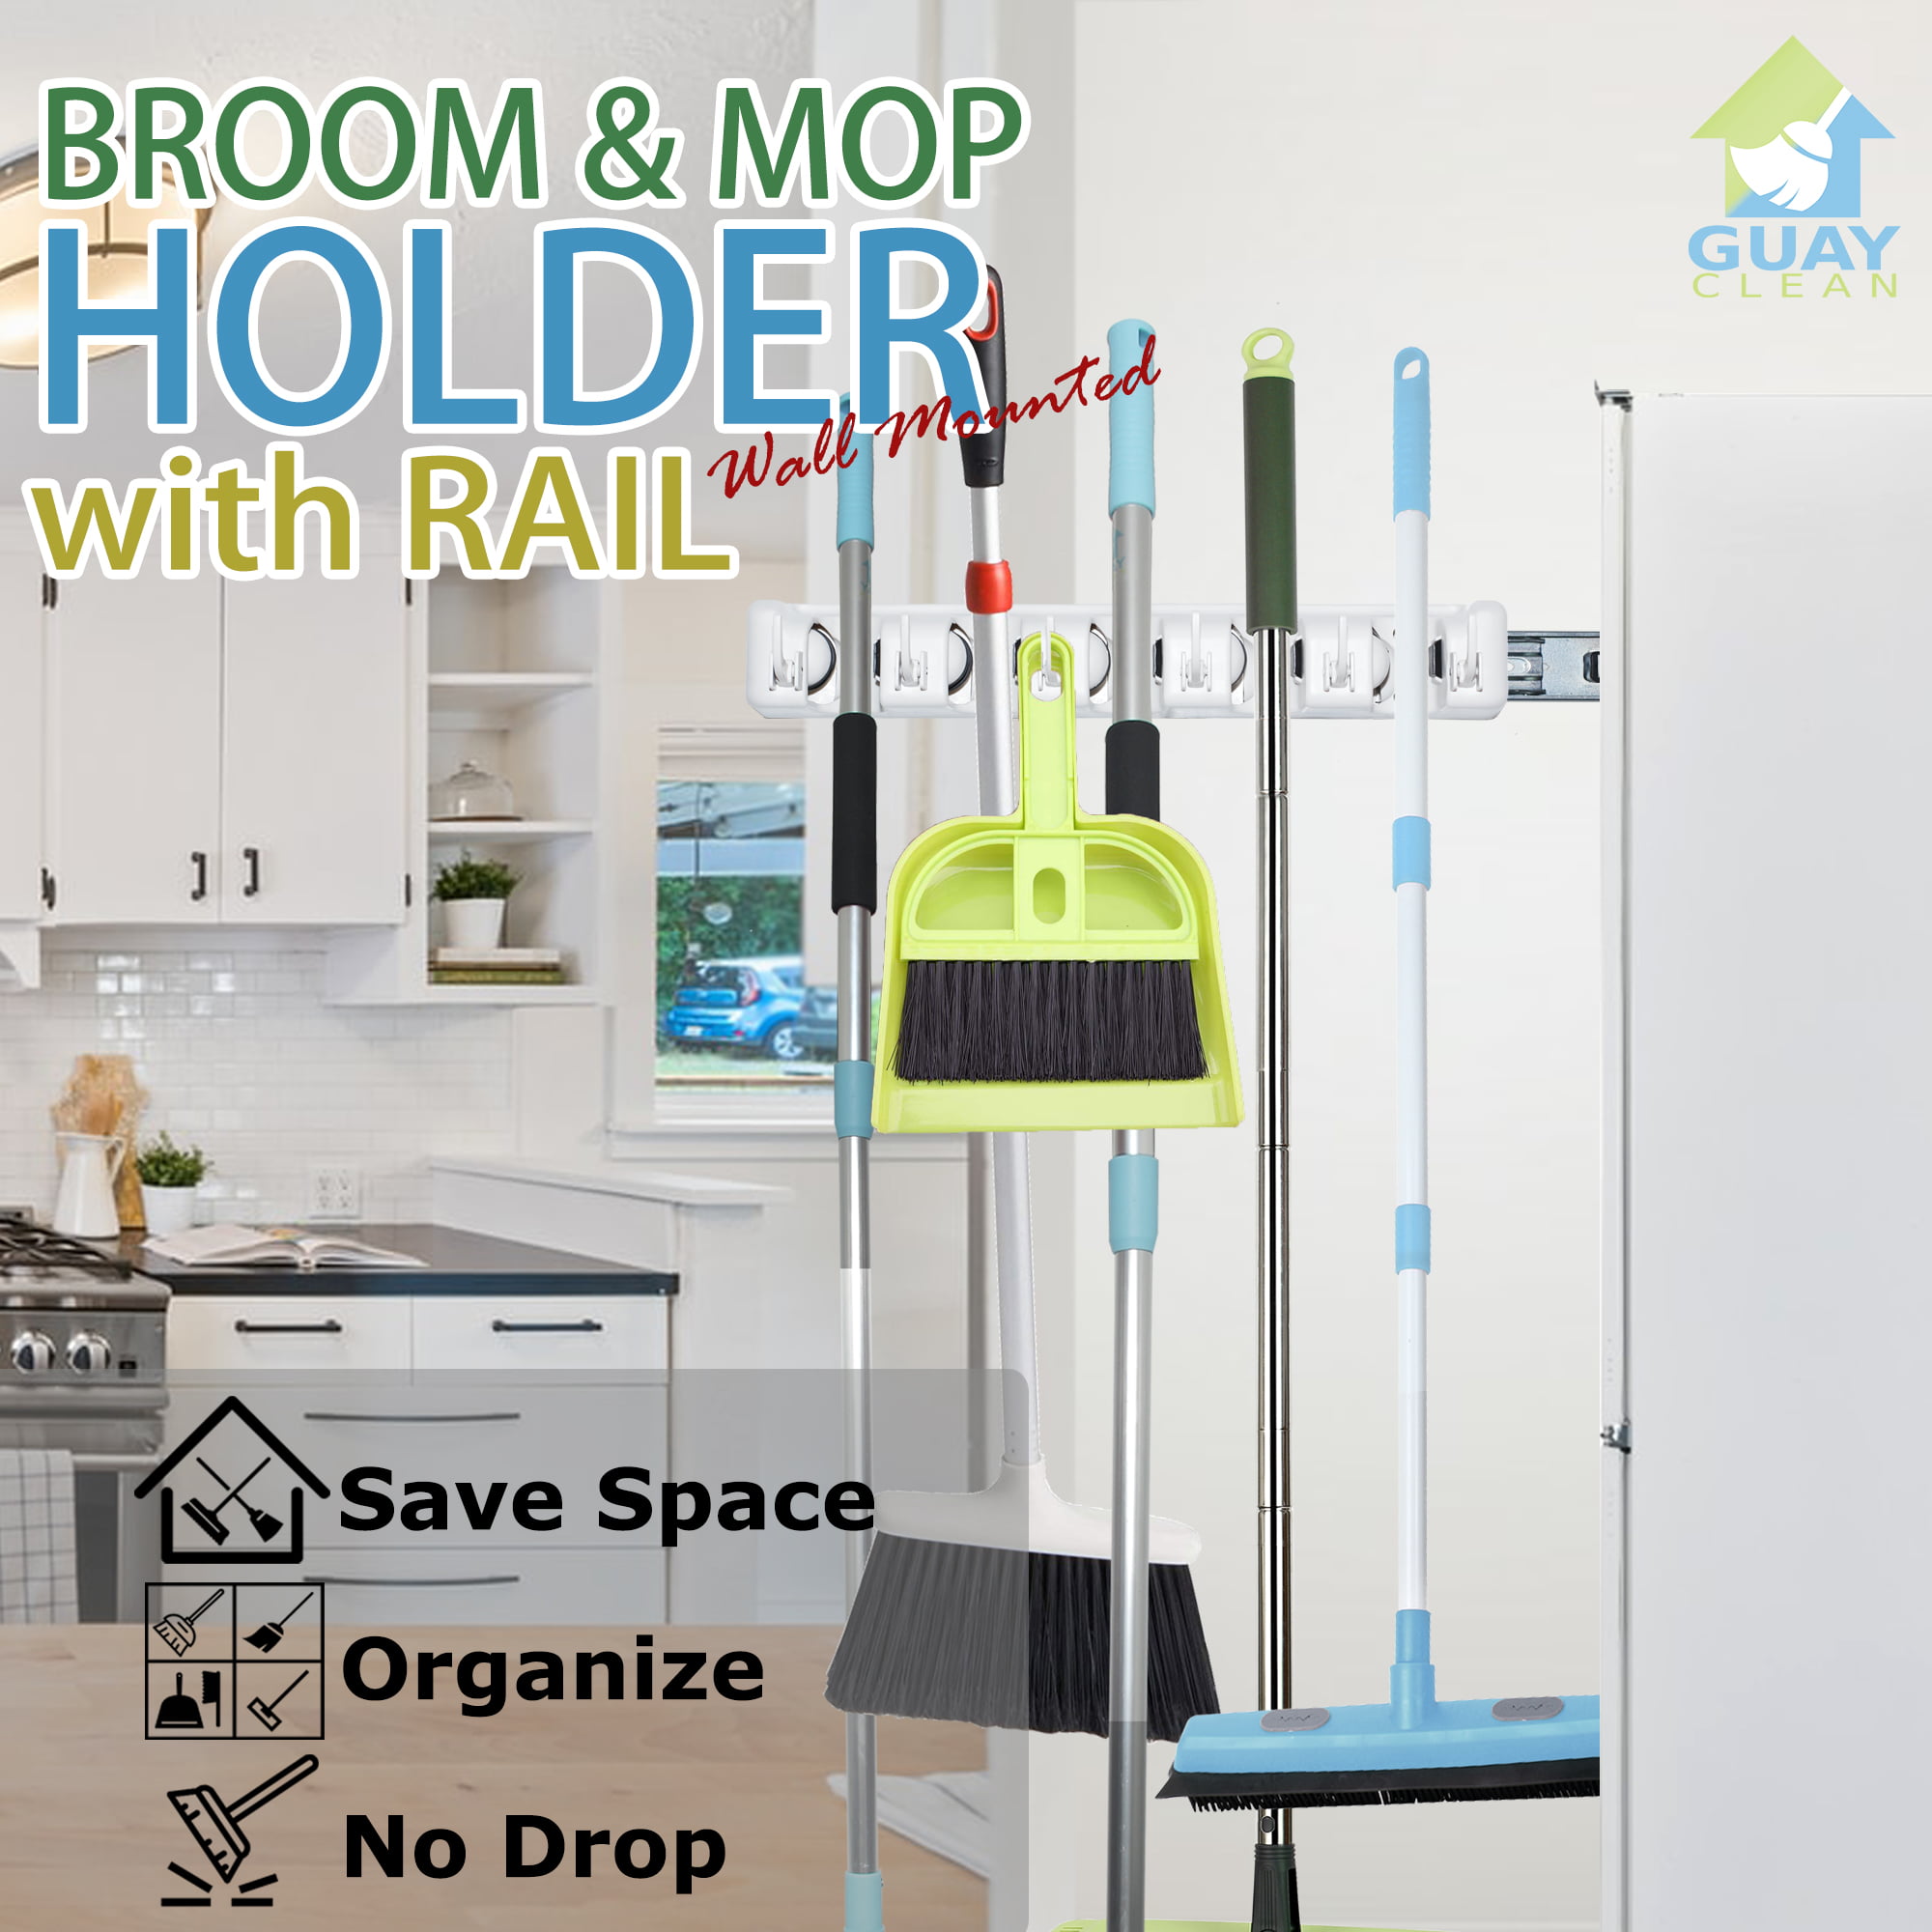 Heavy Duty Wall Mounted Shelf System Garden Tool Organizer Home Storage Utility Rack- Strong Grip Hangers with Foldable Hooks Guay Clean Broom and Mop Holder Fixed 